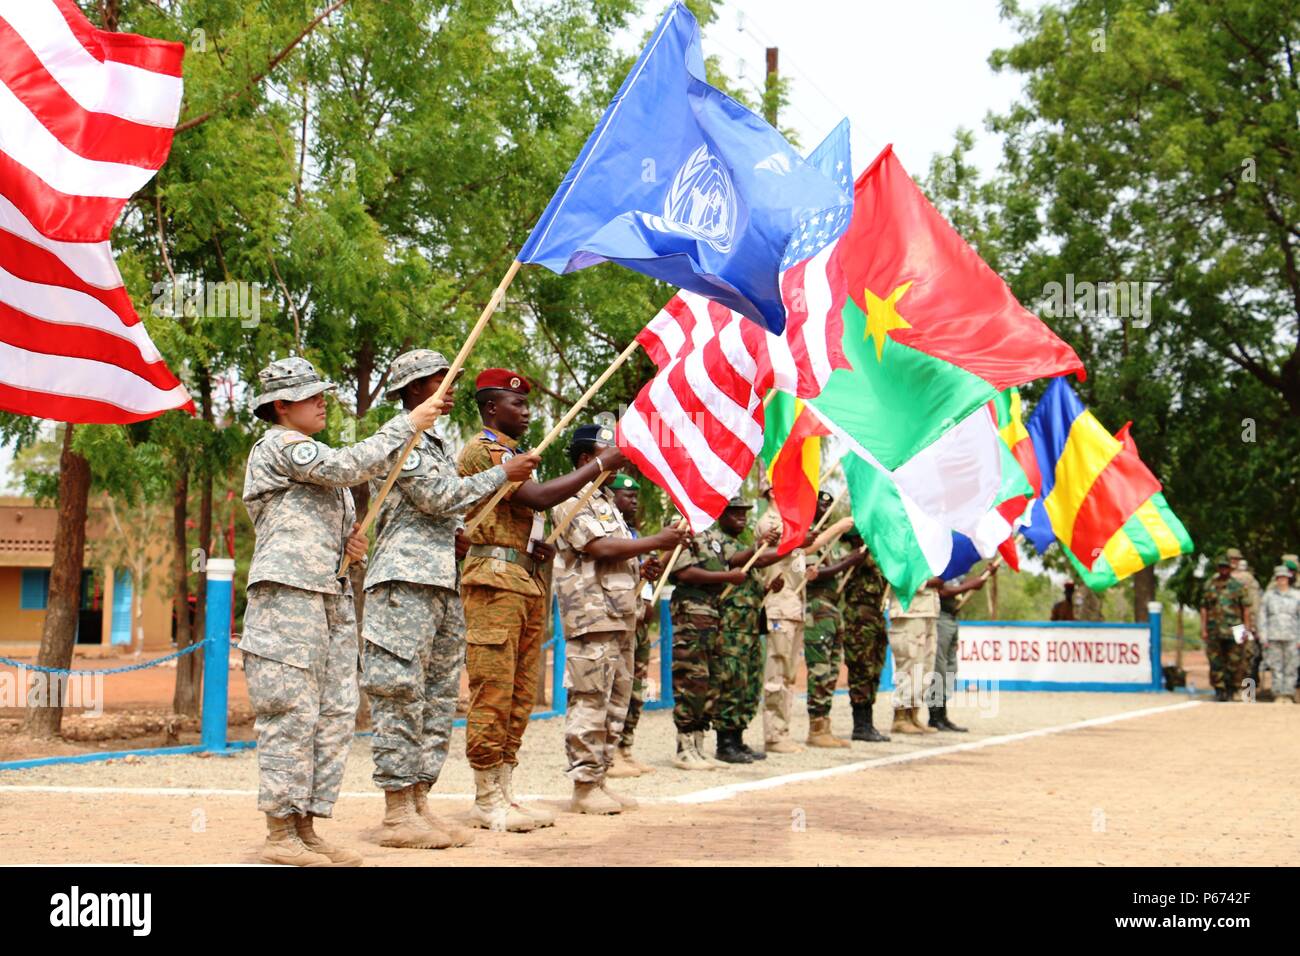 Multinational Western Accord 2016 participants display flags for each country represented at the exercise’s Closing Day Ceremony May 13, 2016 at Camp Zagre, Ouagadougou, Burkina Faso. The two-week command post exercise, which began May 2, brought together 15 West African Nations, 7 NATO European countries and the U.S. to work as a multinational headquarters to build interoperability and shared understanding. (U.S. Army photo by Staff Sgt. Candace Mundt/Released) Stock Photo